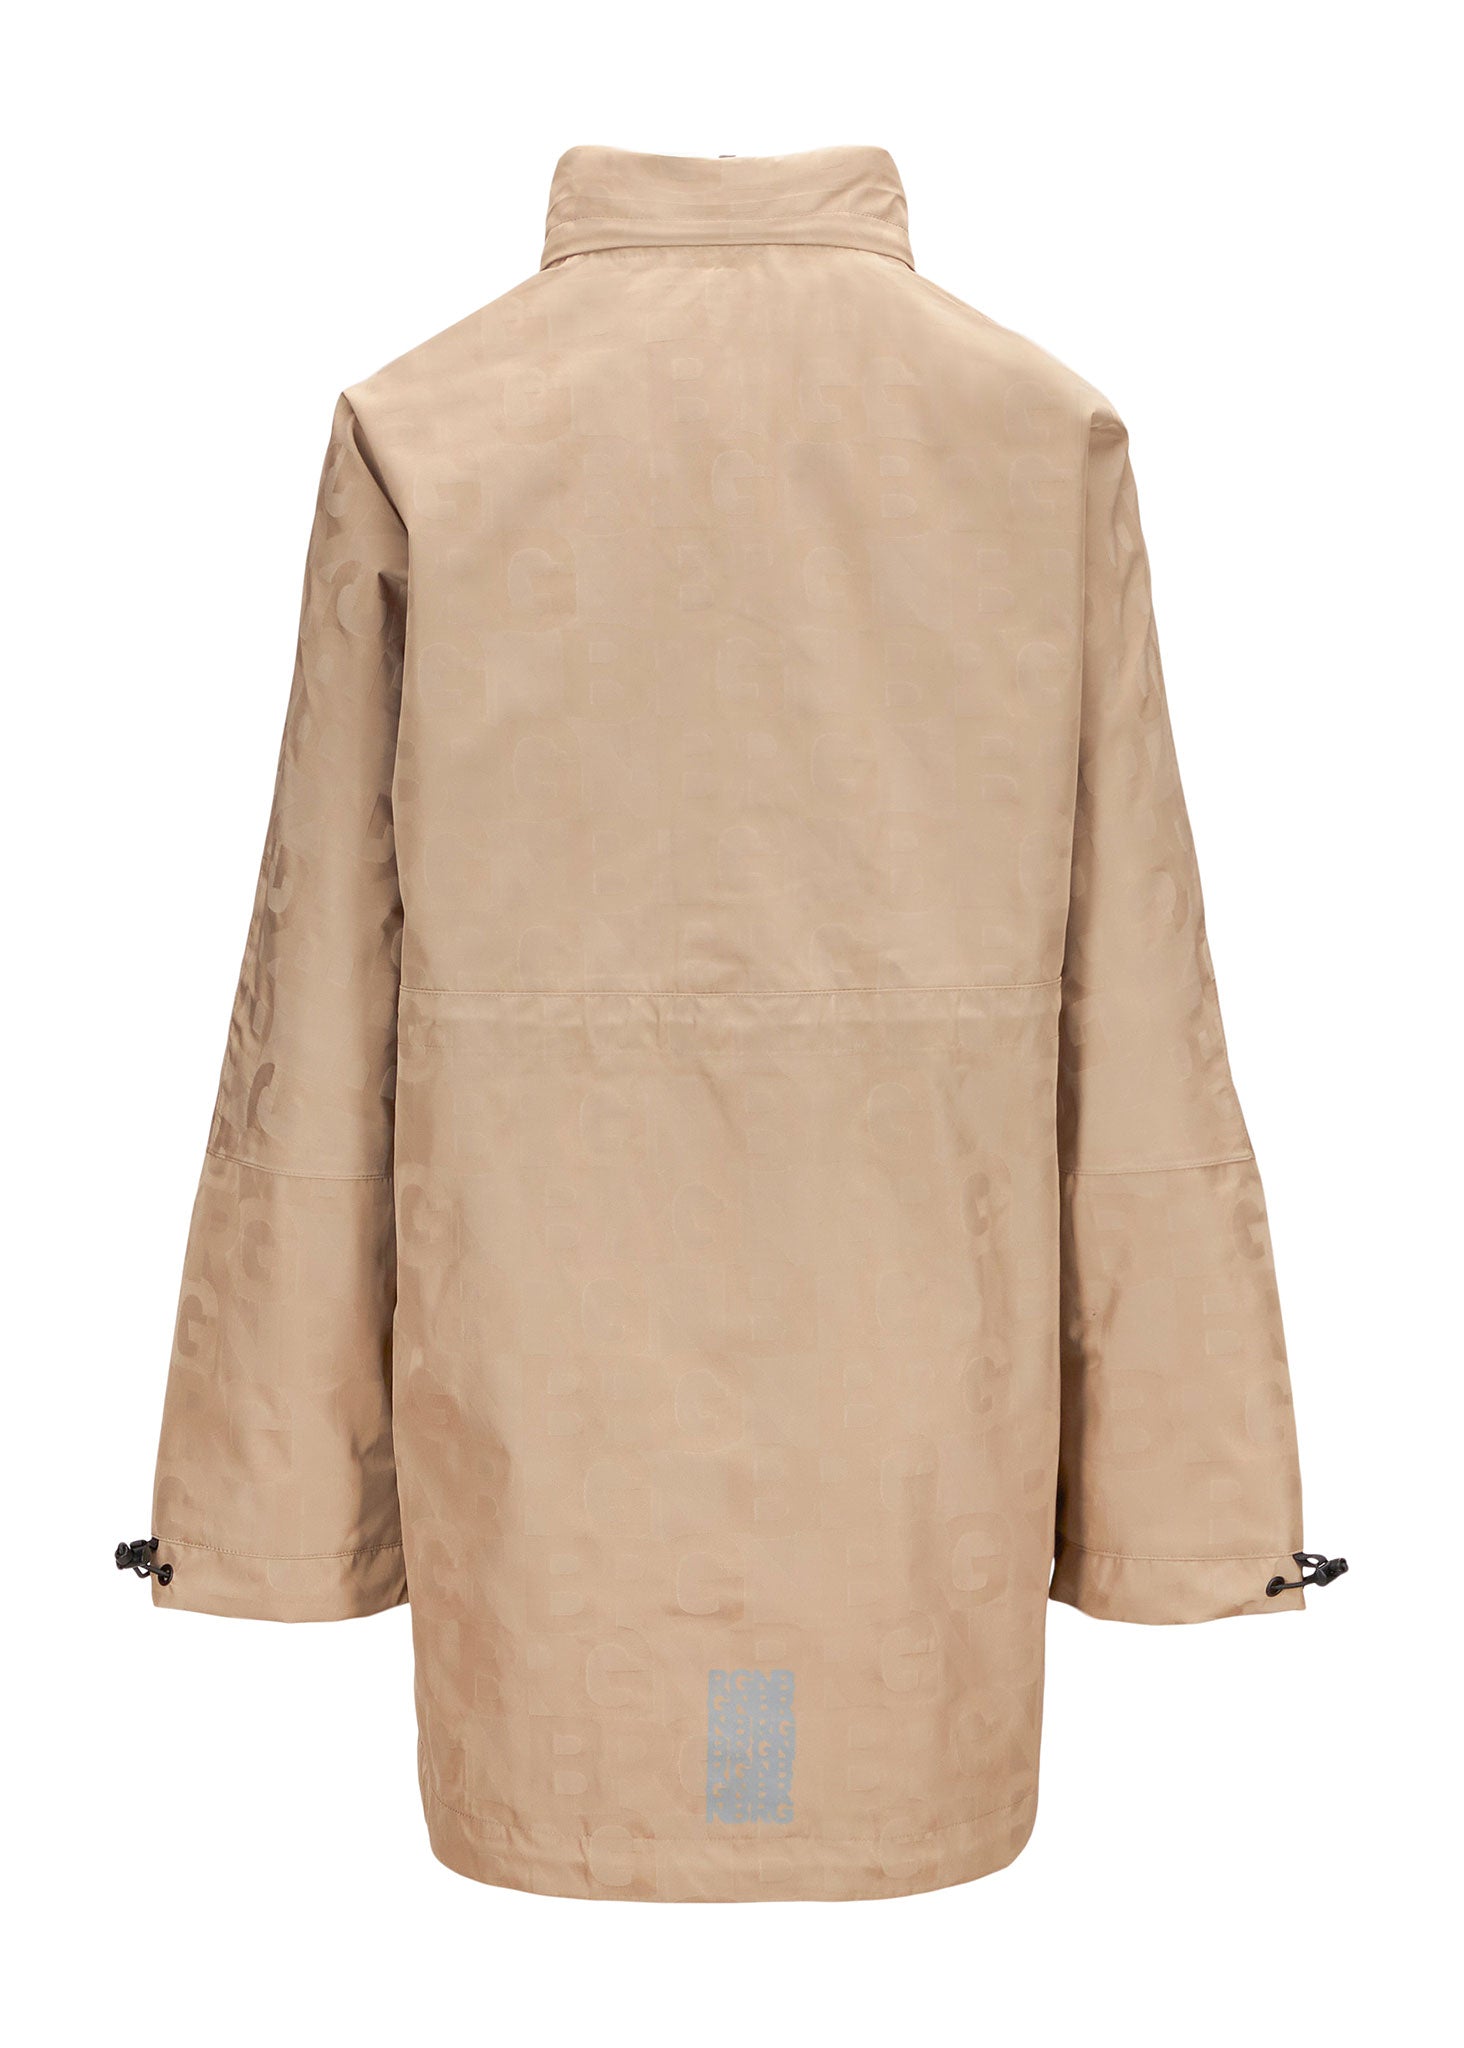 BRGN by Lunde & Gaundal Regnbyge Anorak Limited edition Coats 133 BRGN Sand Jacquard